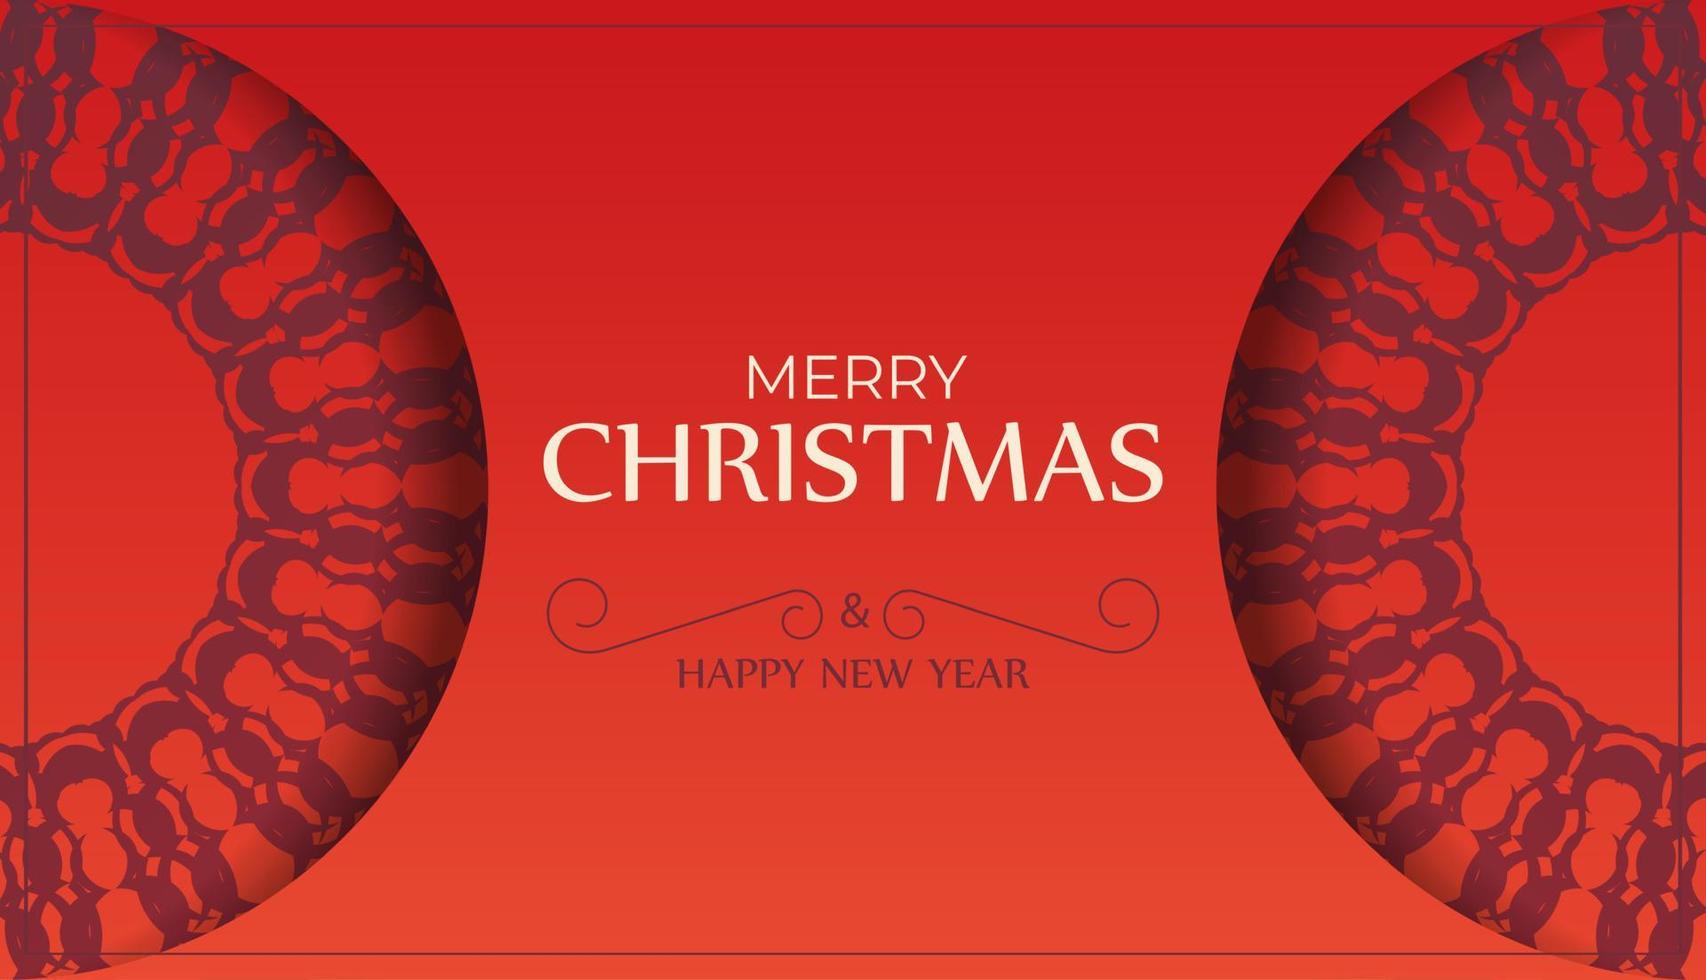 Merry Christmas and Happy New Year Greeting Brochure Template Red Color with Abstract Burgundy Pattern vector